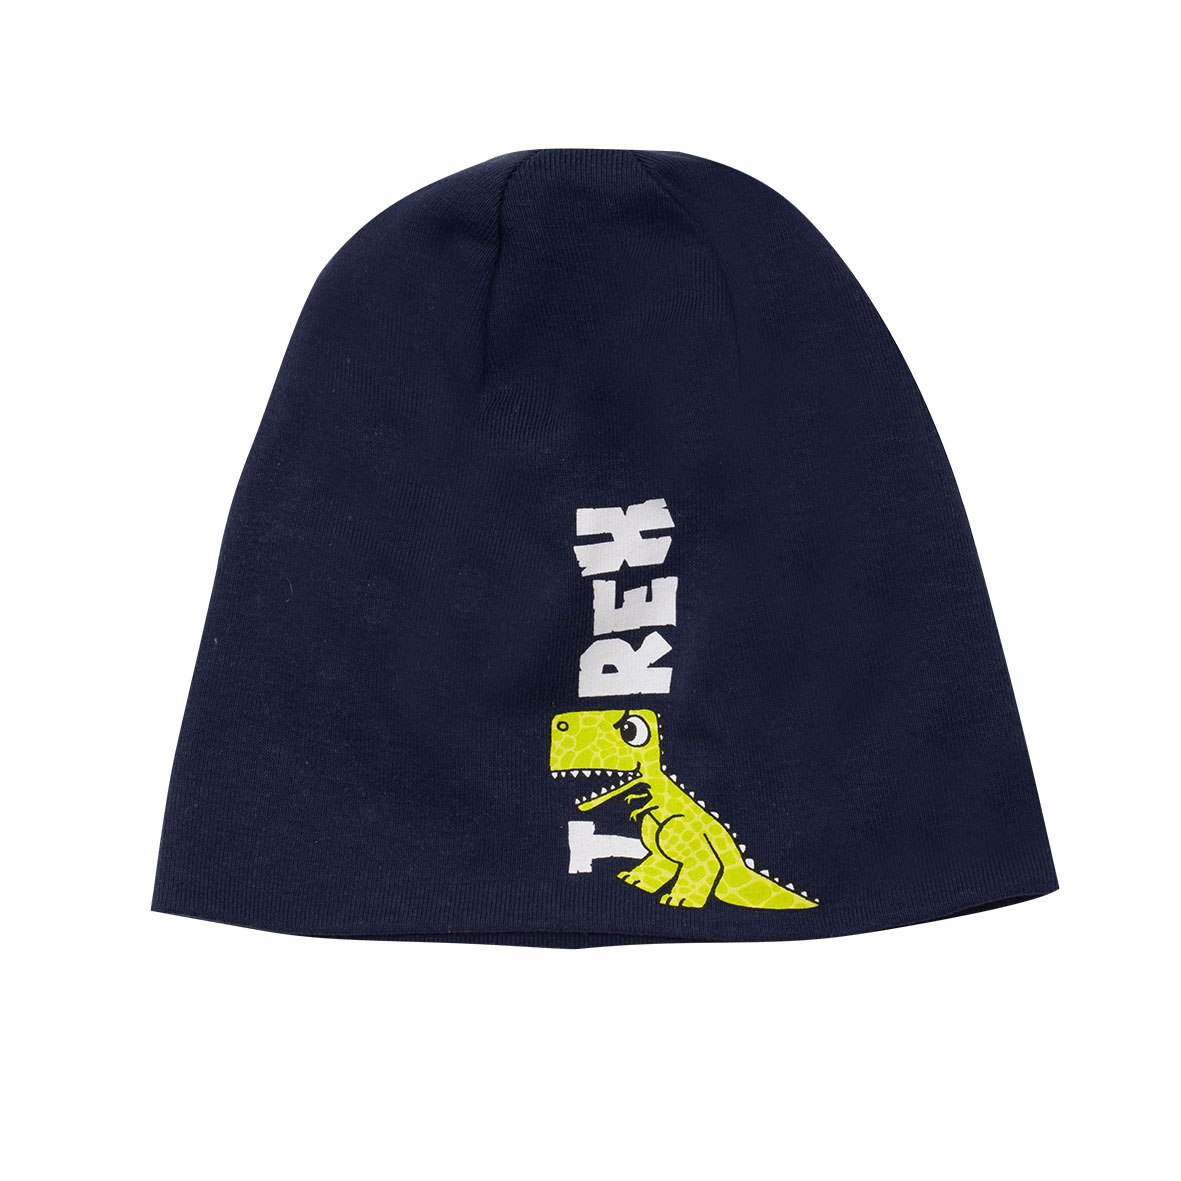 Mawi cappello jersey   baby  boy - Mawi